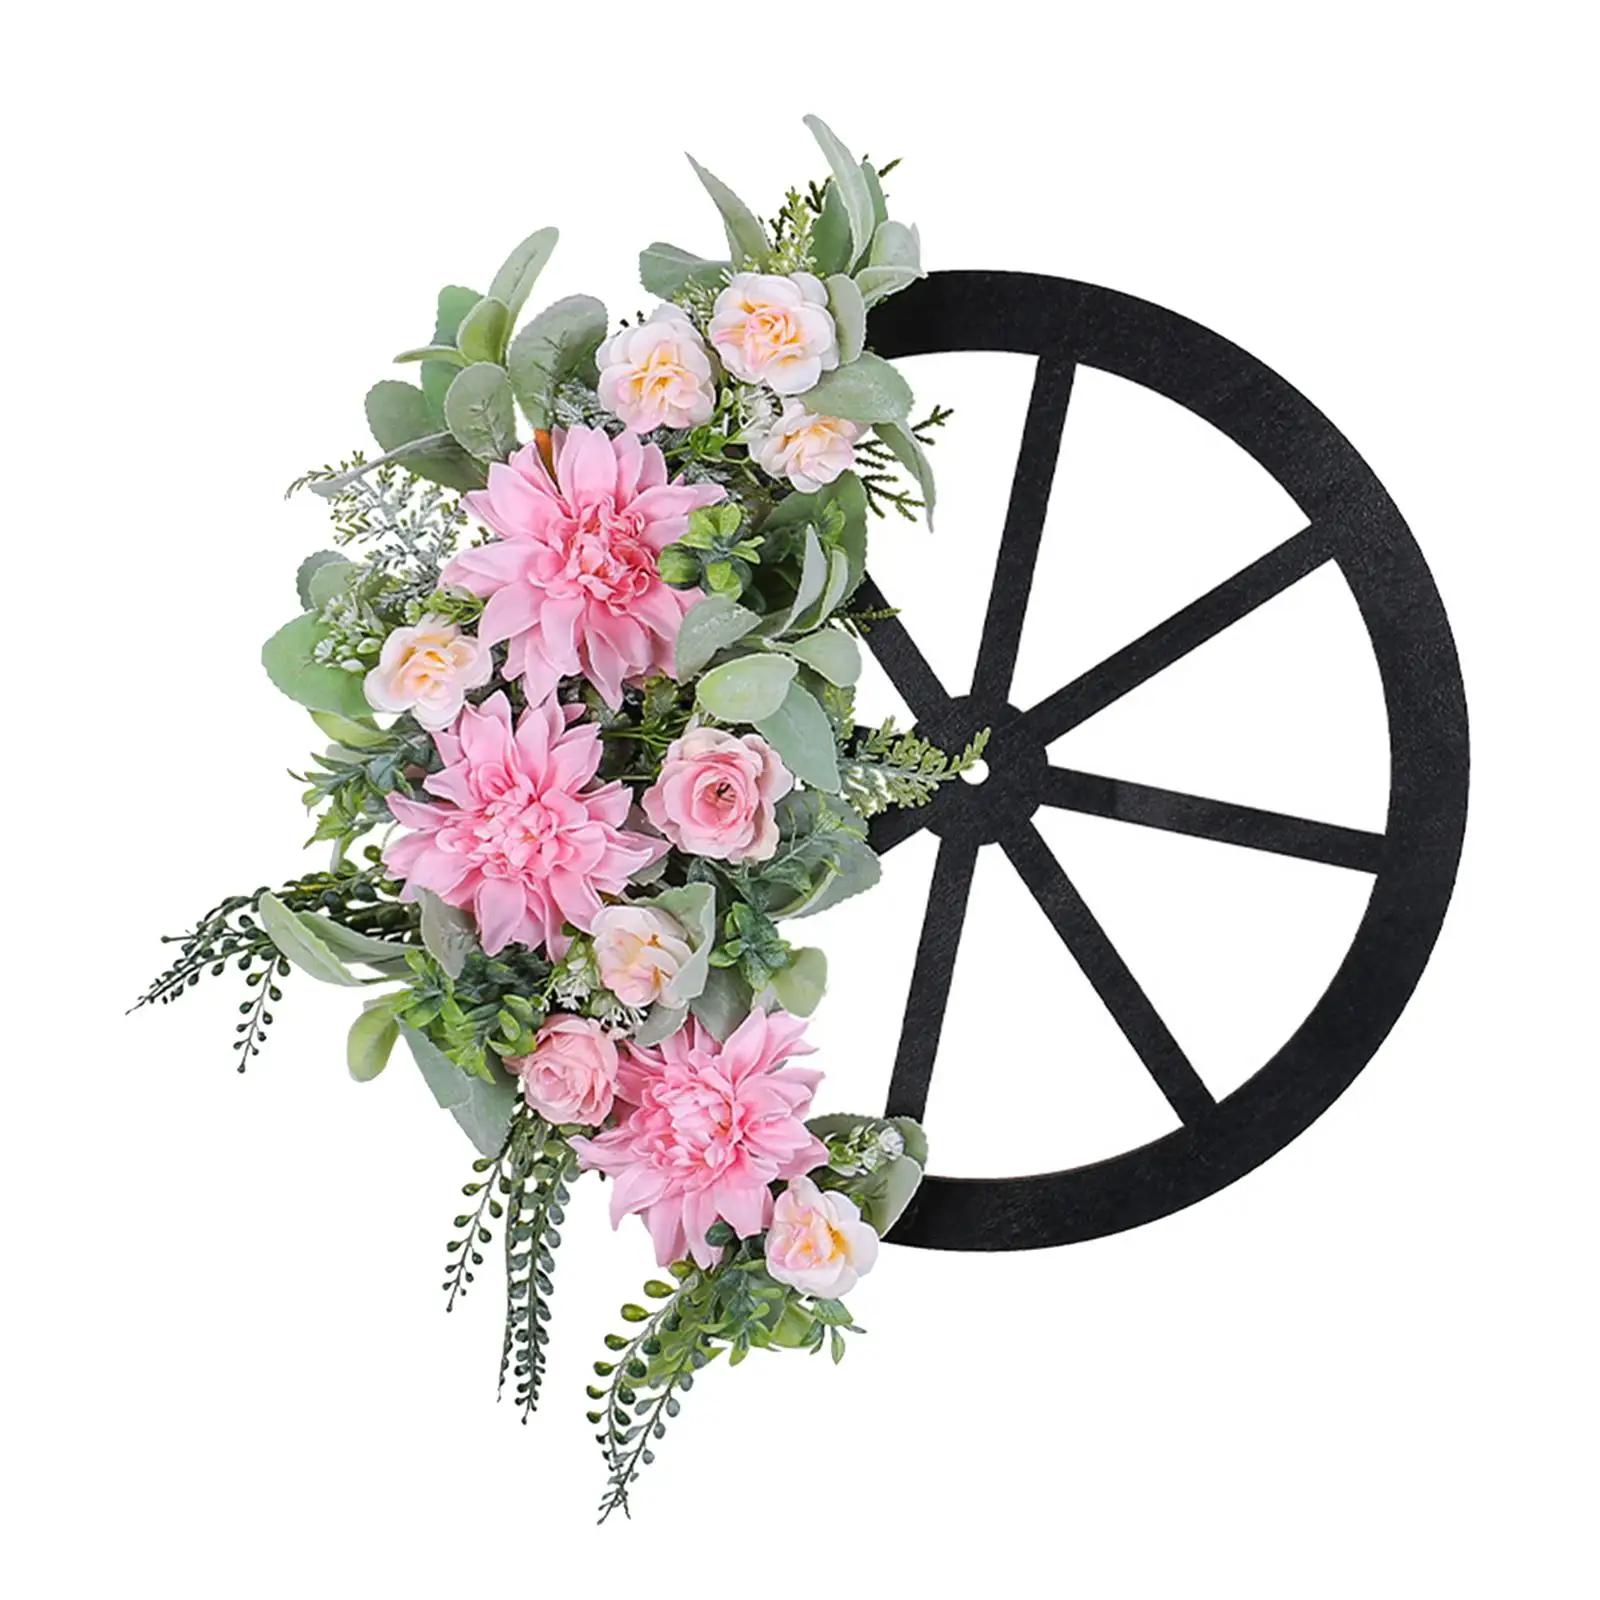 Spring Wreath Pink Artificial Flowers and Wheel Decoration 16.9x16.5inch Lifelike for Outside Farmhouse Decor Multipurpose